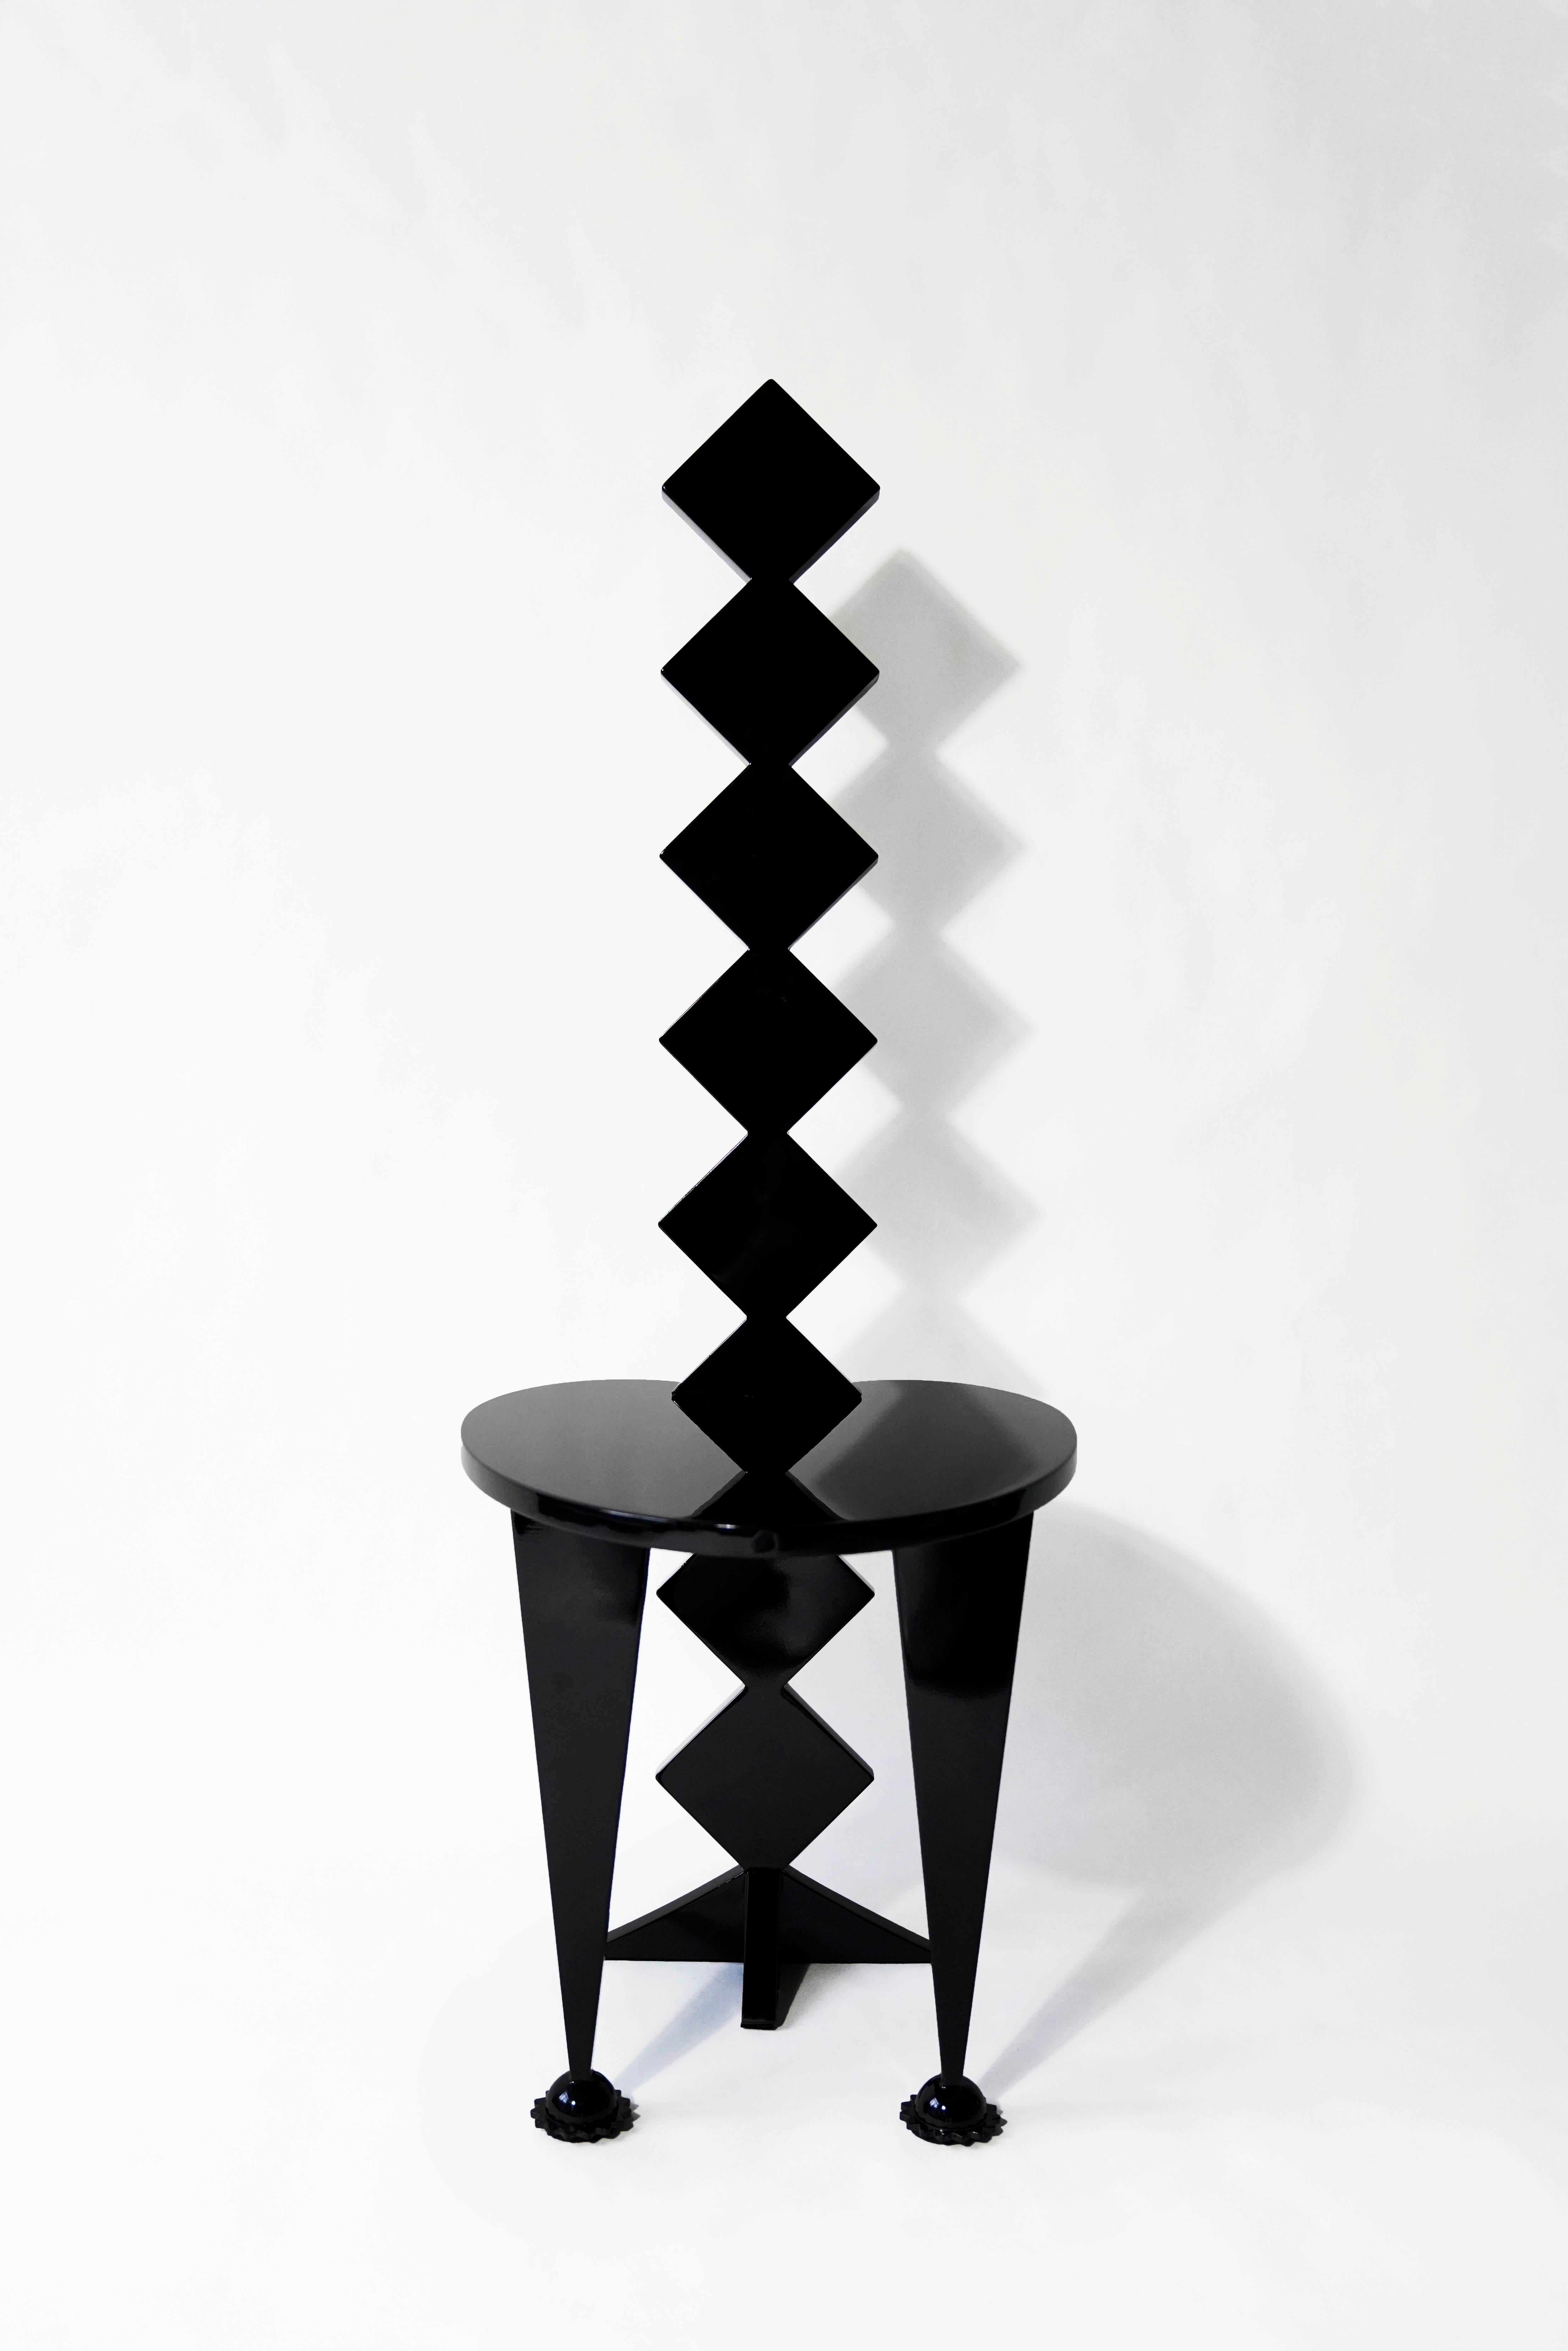 He Fade Away all black chair by The Shaw
Dimensions: D45 x W 54 x H129 cm
Materials: Stainless Steel, Wood

HE FADE AWAY high-backed chair is a stage play released by THESHAW 2021 in which red and black overlap. The day is overcast, torrential